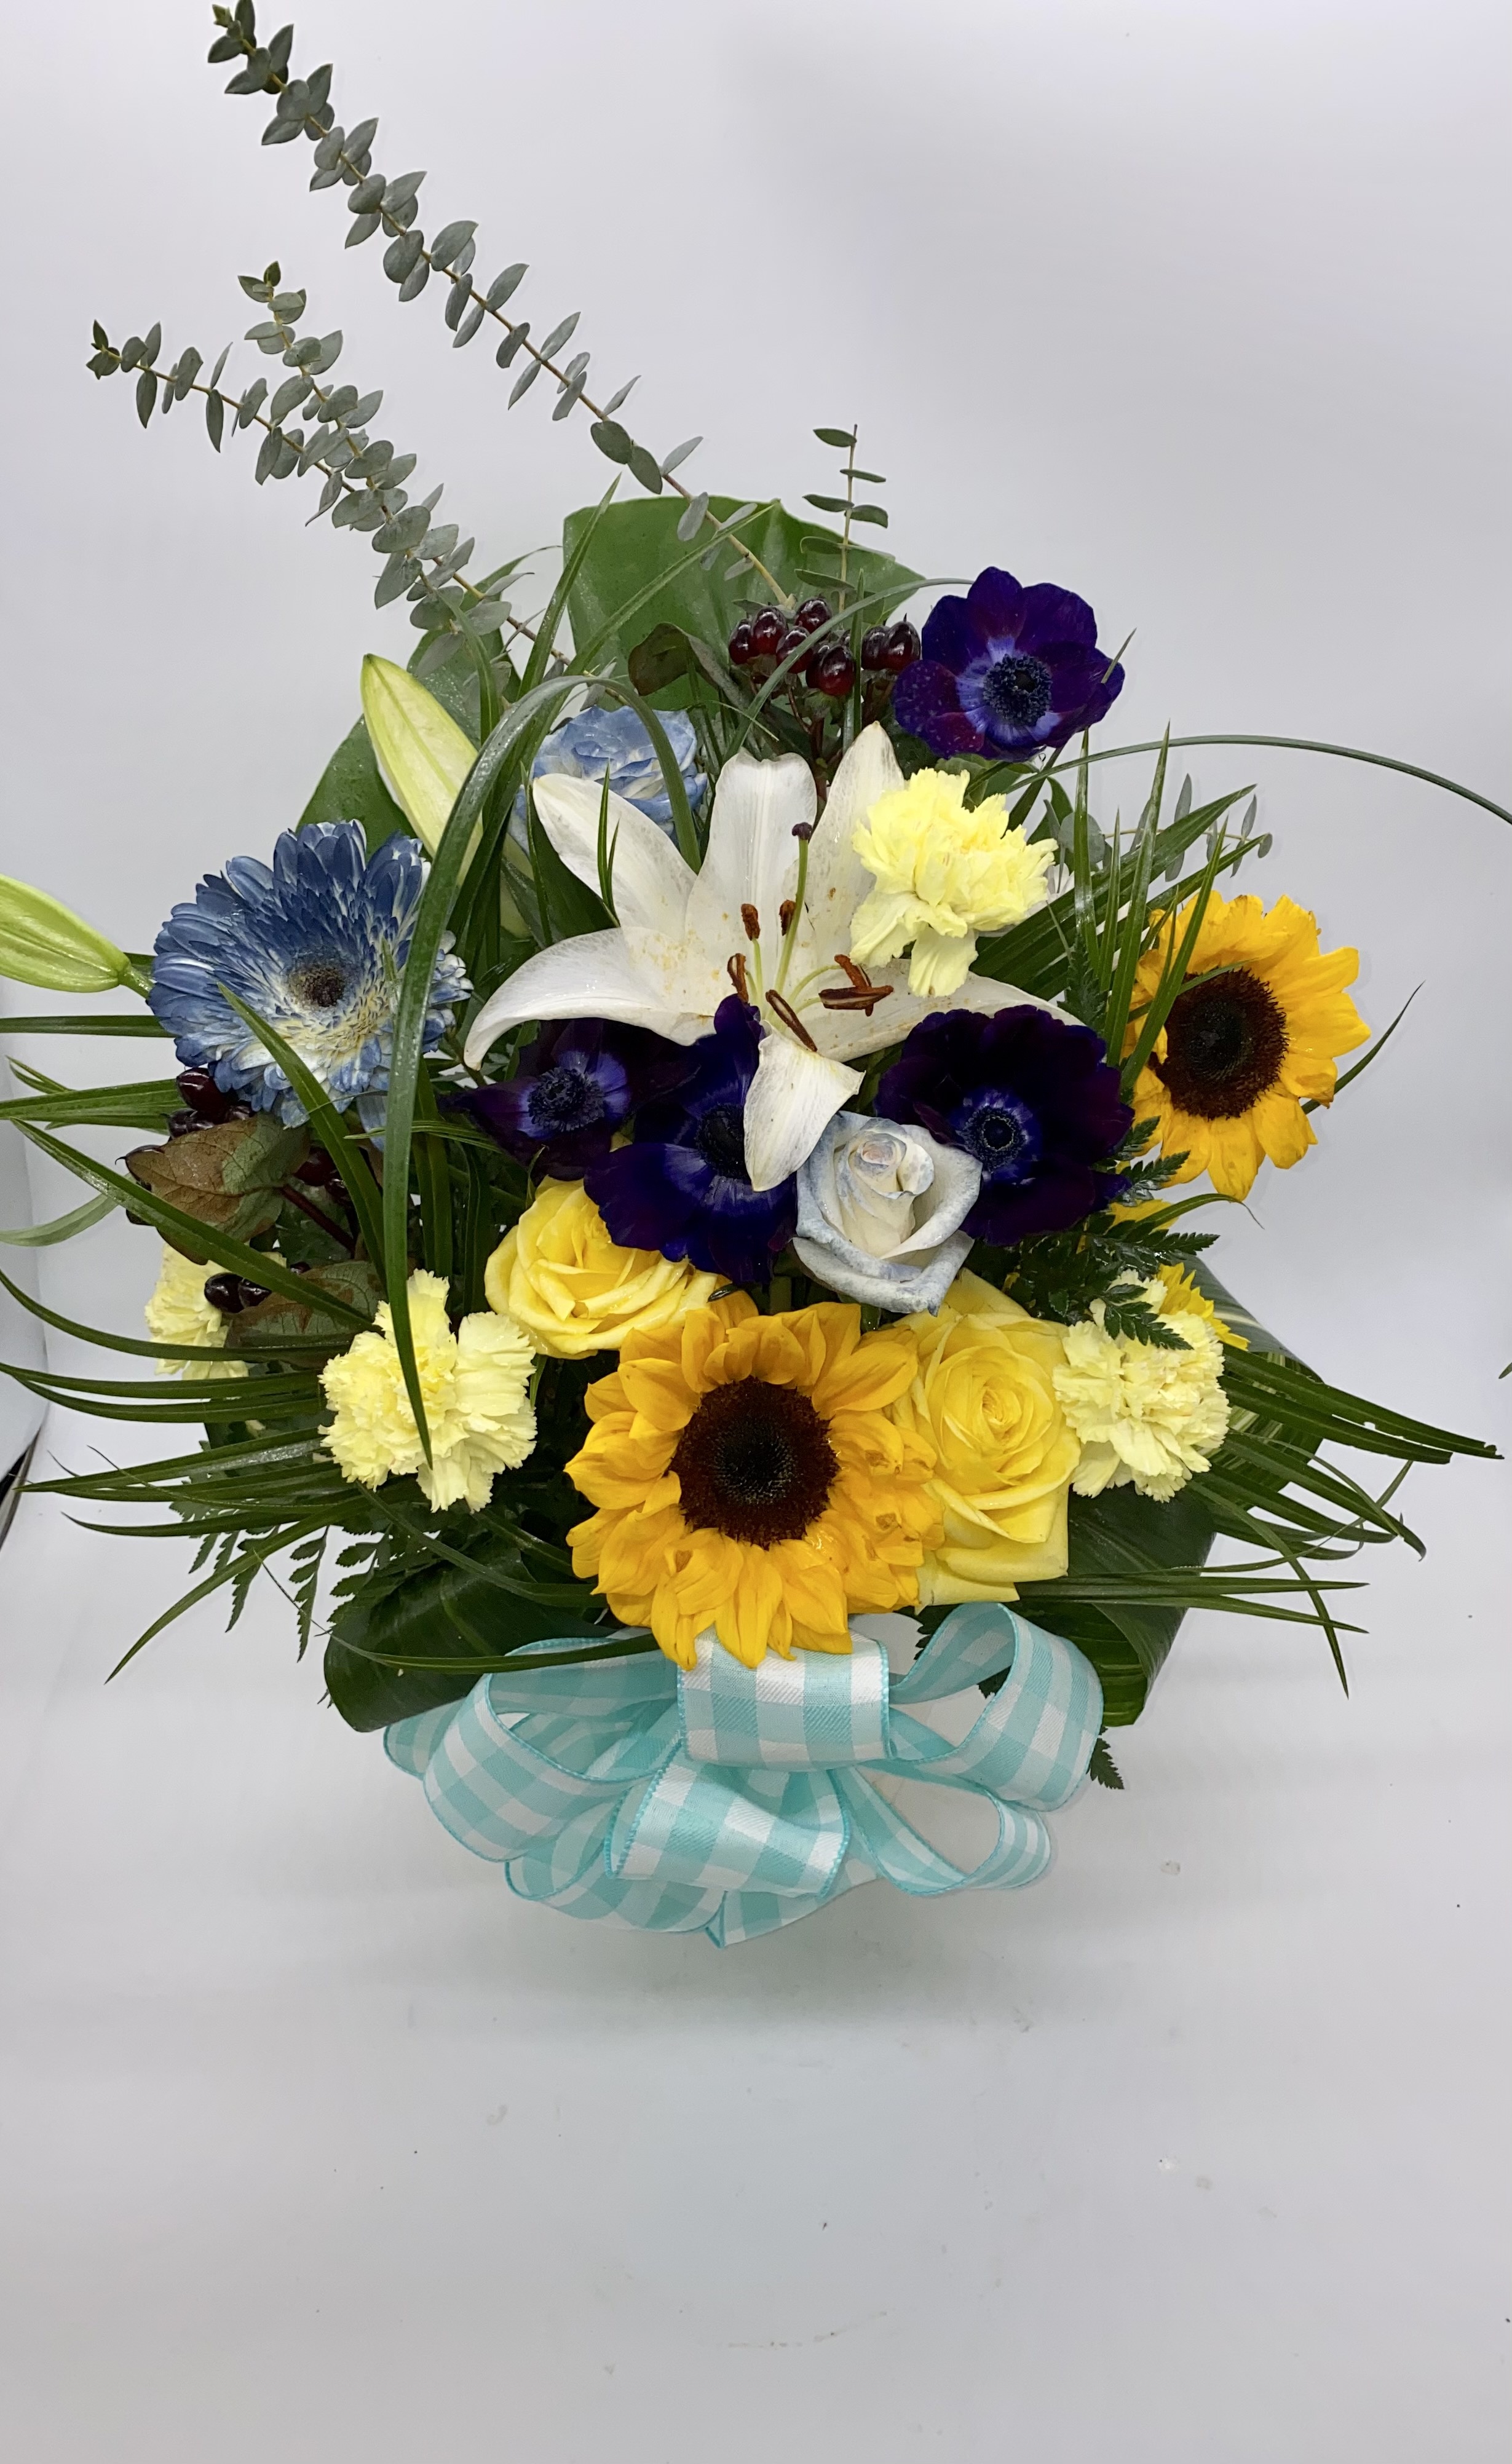 Sunflowers, Lily and Gerberas